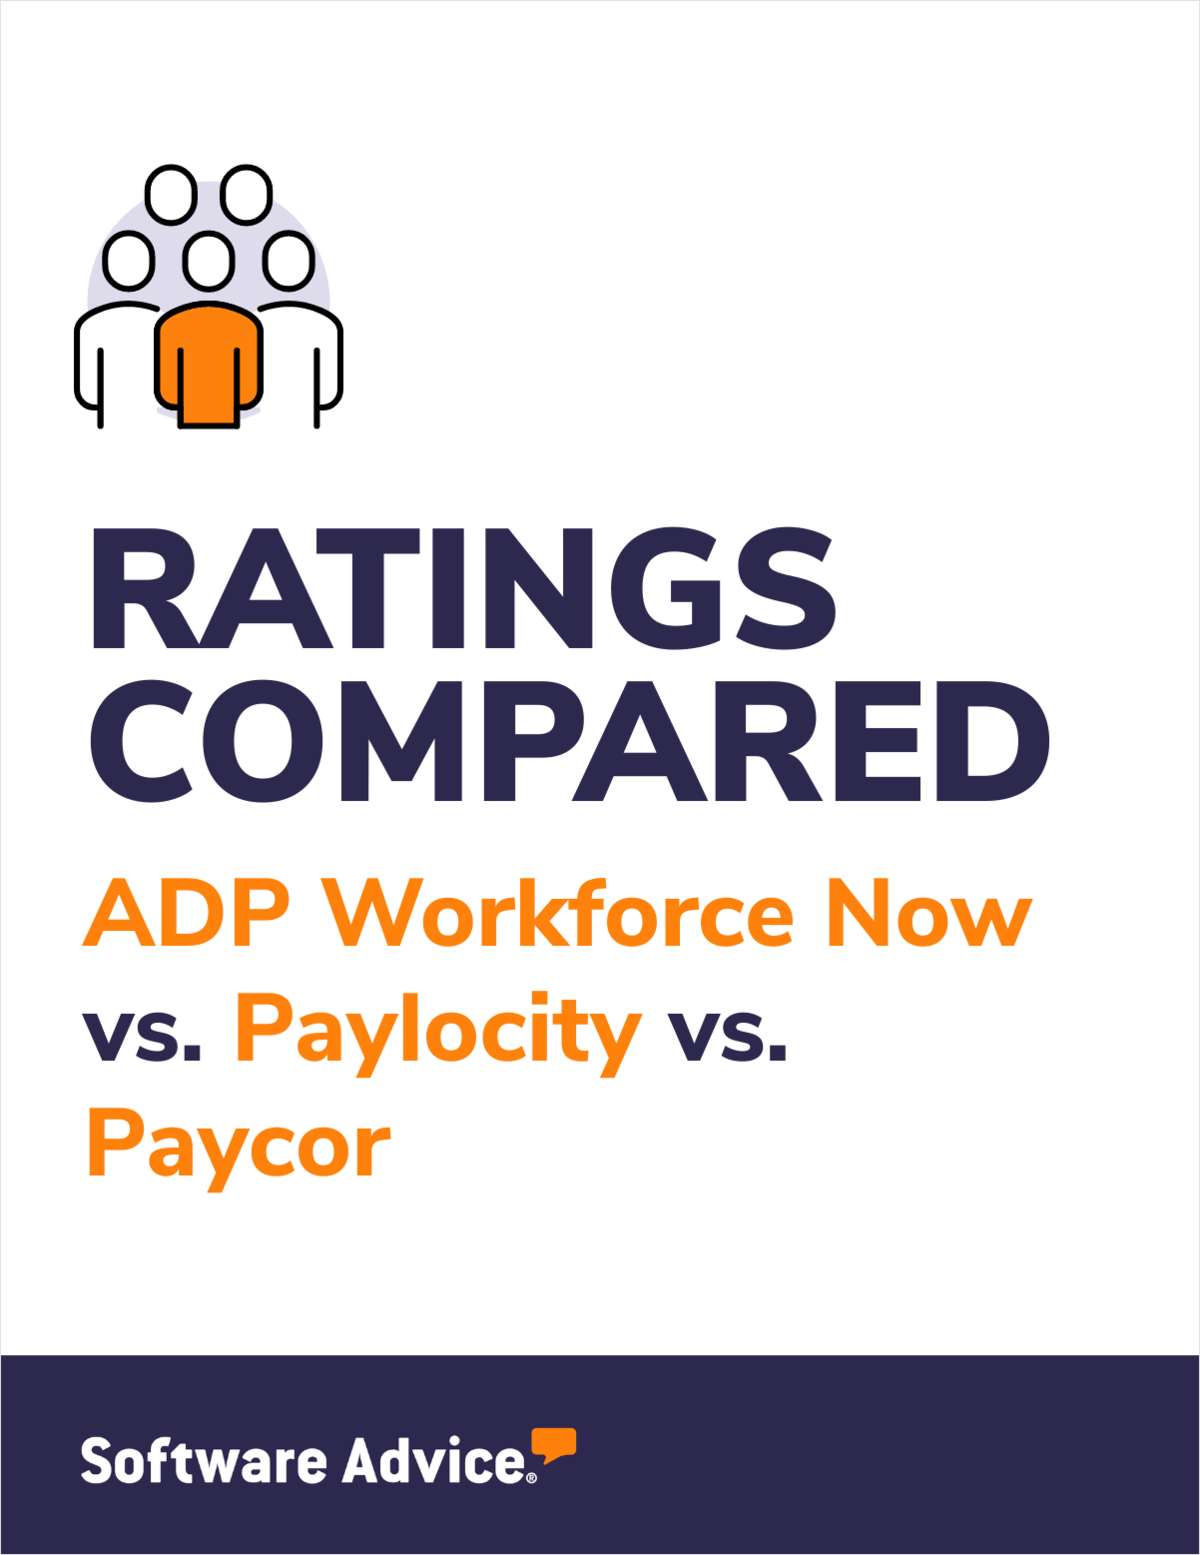 ADP Workforce Now vs. Paylocity vs. Paycor Ratings Compared